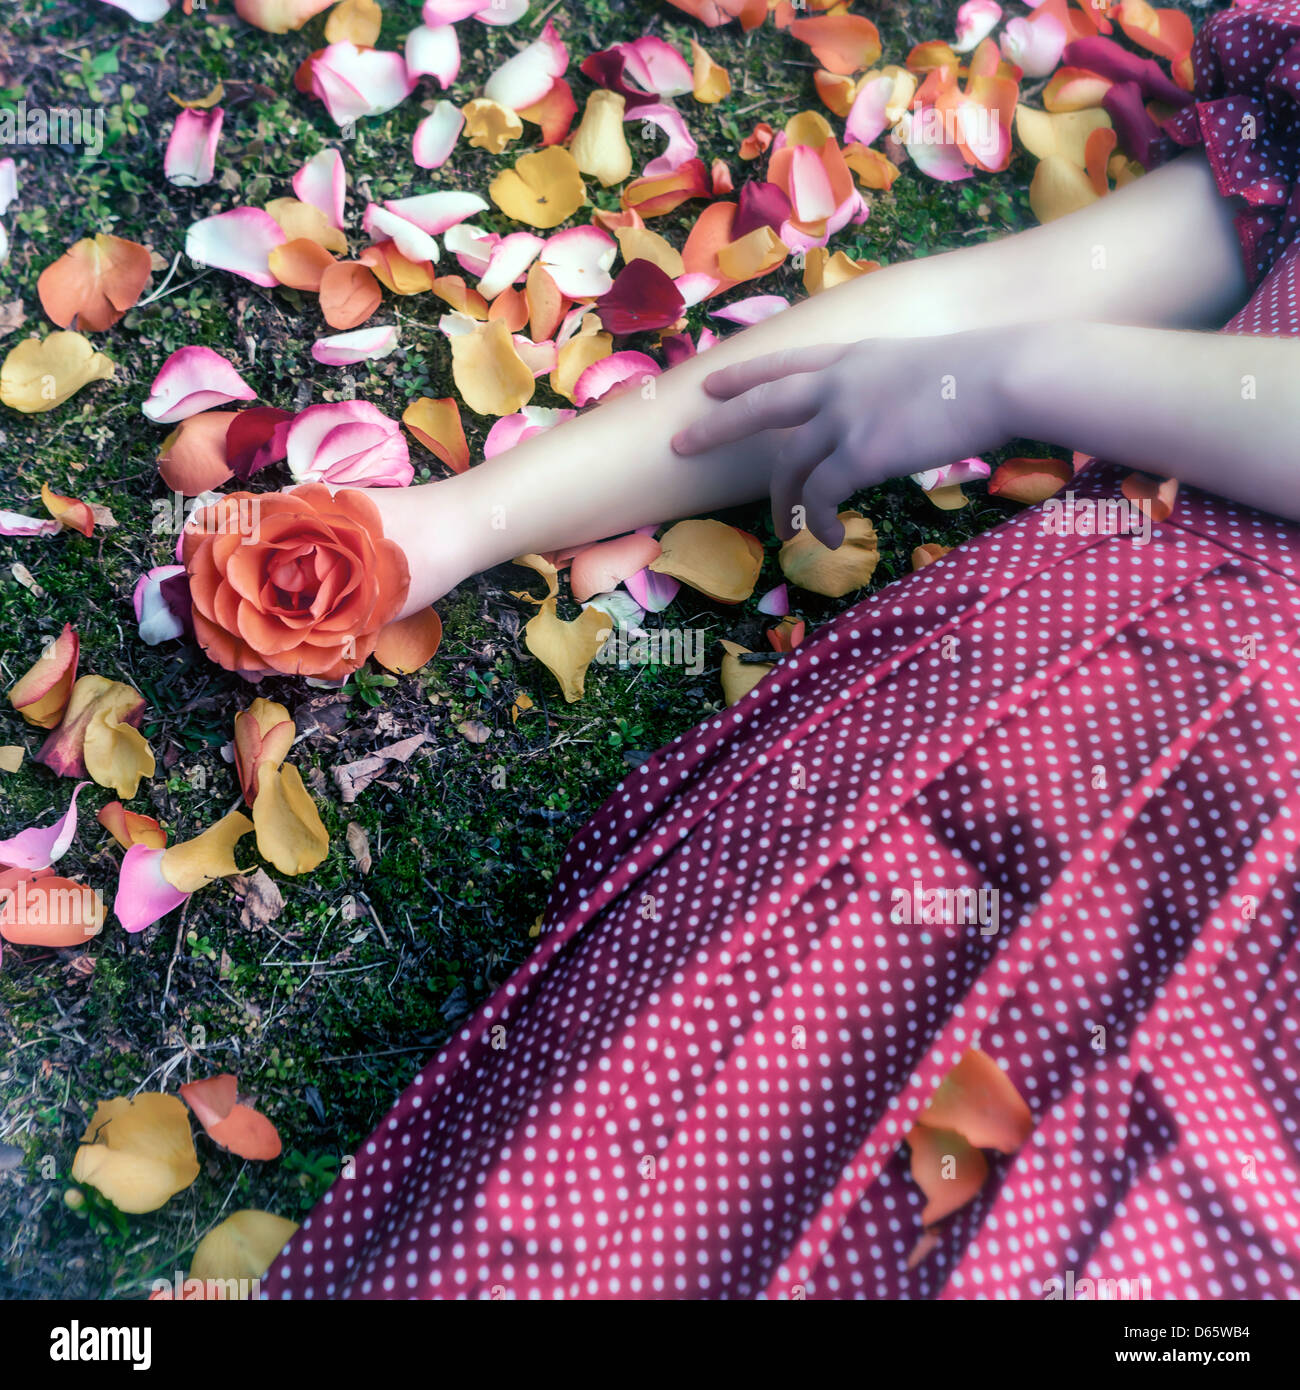 a girl in a red dress is lying on grass in between petals, a rose in her hand Stock Photo